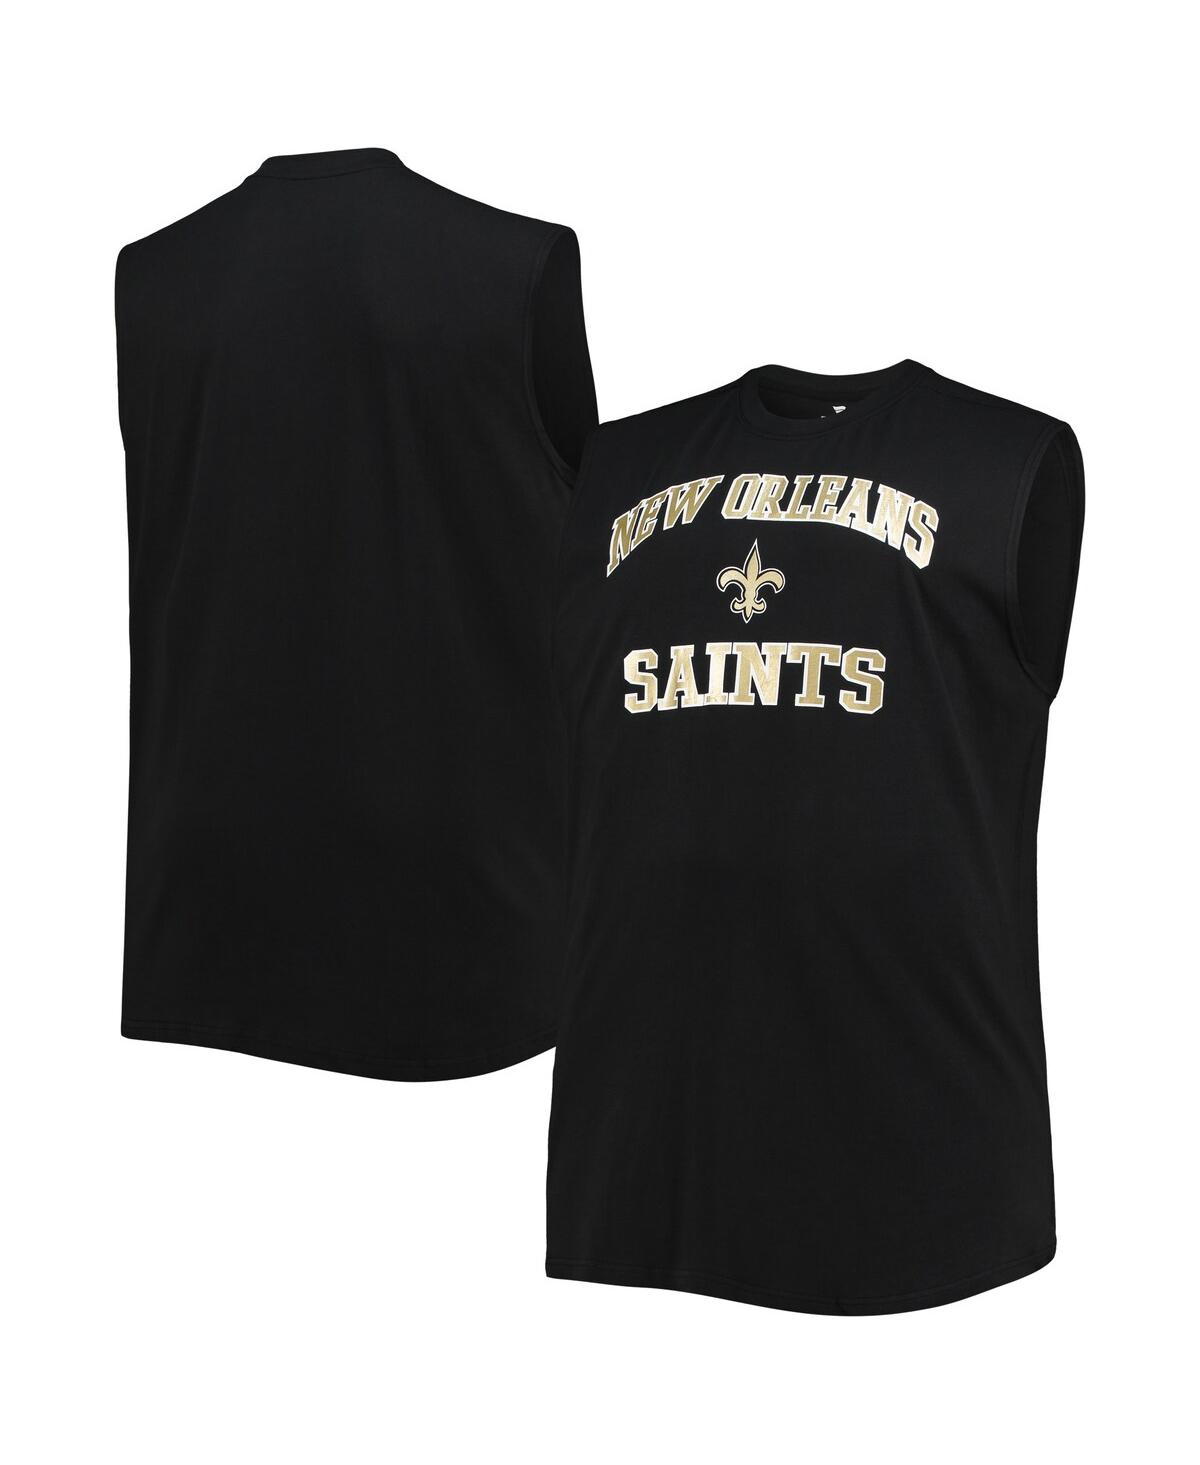 PROFILE MEN'S BLACK NEW ORLEANS SAINTS BIG AND TALL MUSCLE TANK TOP